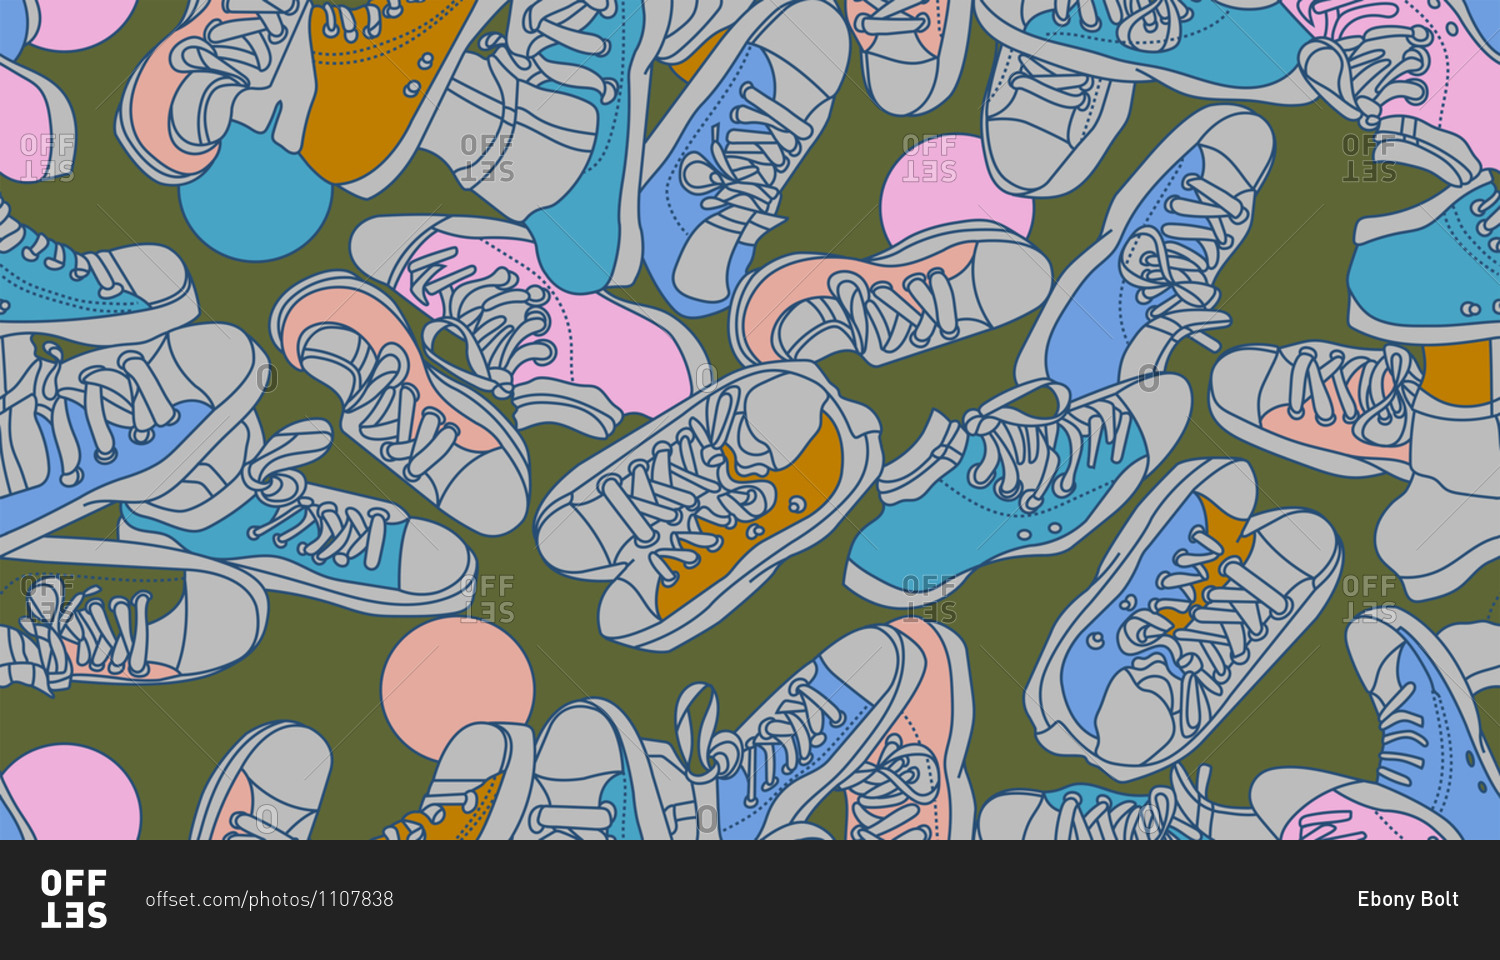 Horizontal digital illustration of several sneakers isolated\
on an olive green colored background stock photo - OFFSET